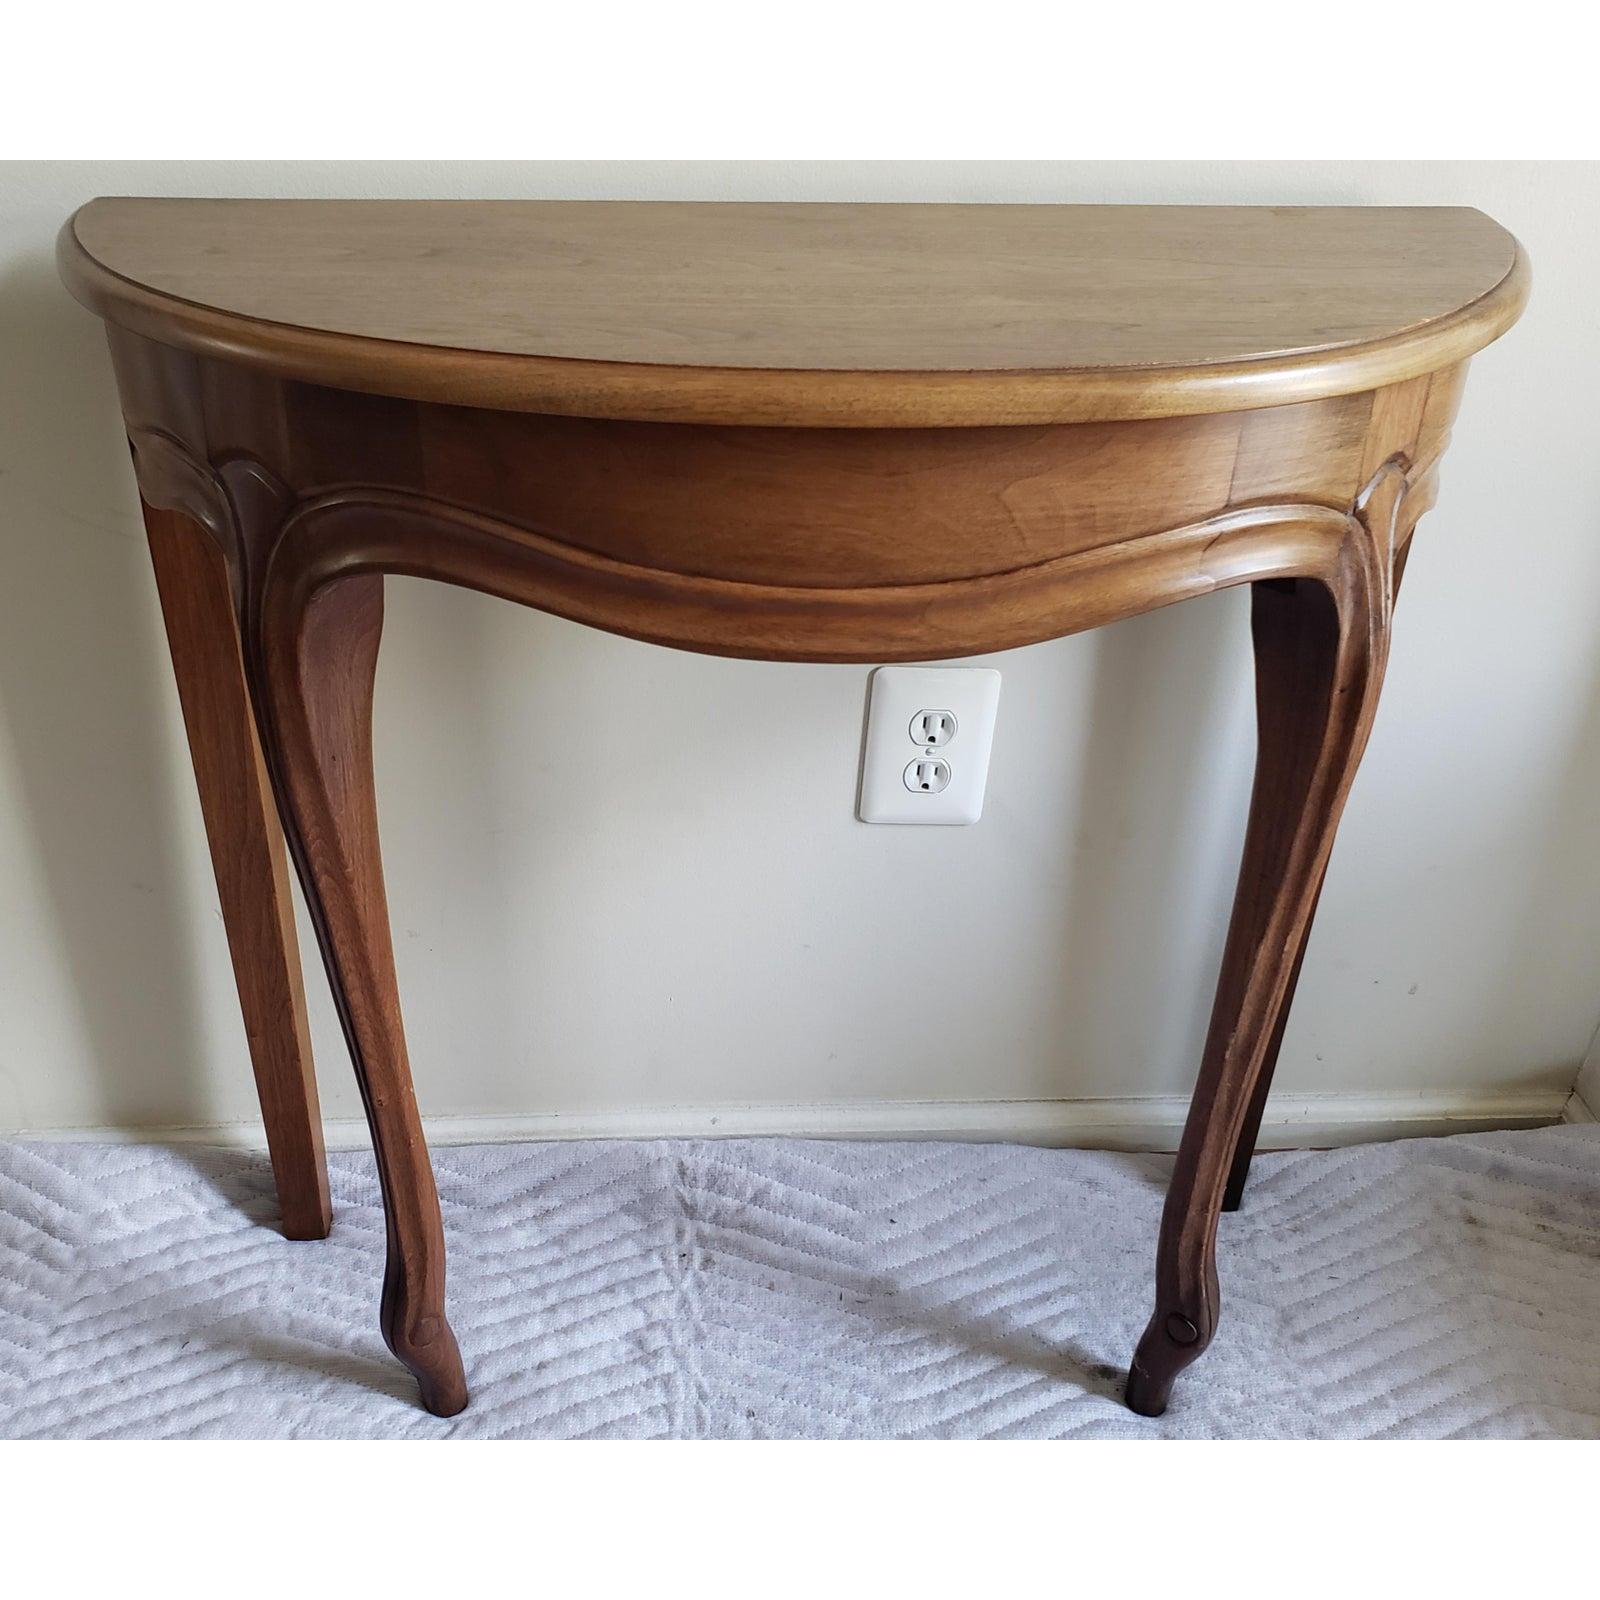 Solid dark walnut wood demilune foyer table with carved legs. Minimal wear. Hand rubbed finish. The maker is J. Raymond Smith Furniture Co. in Shippenburg, PA. Made in 1976. 
measurements are 30.75